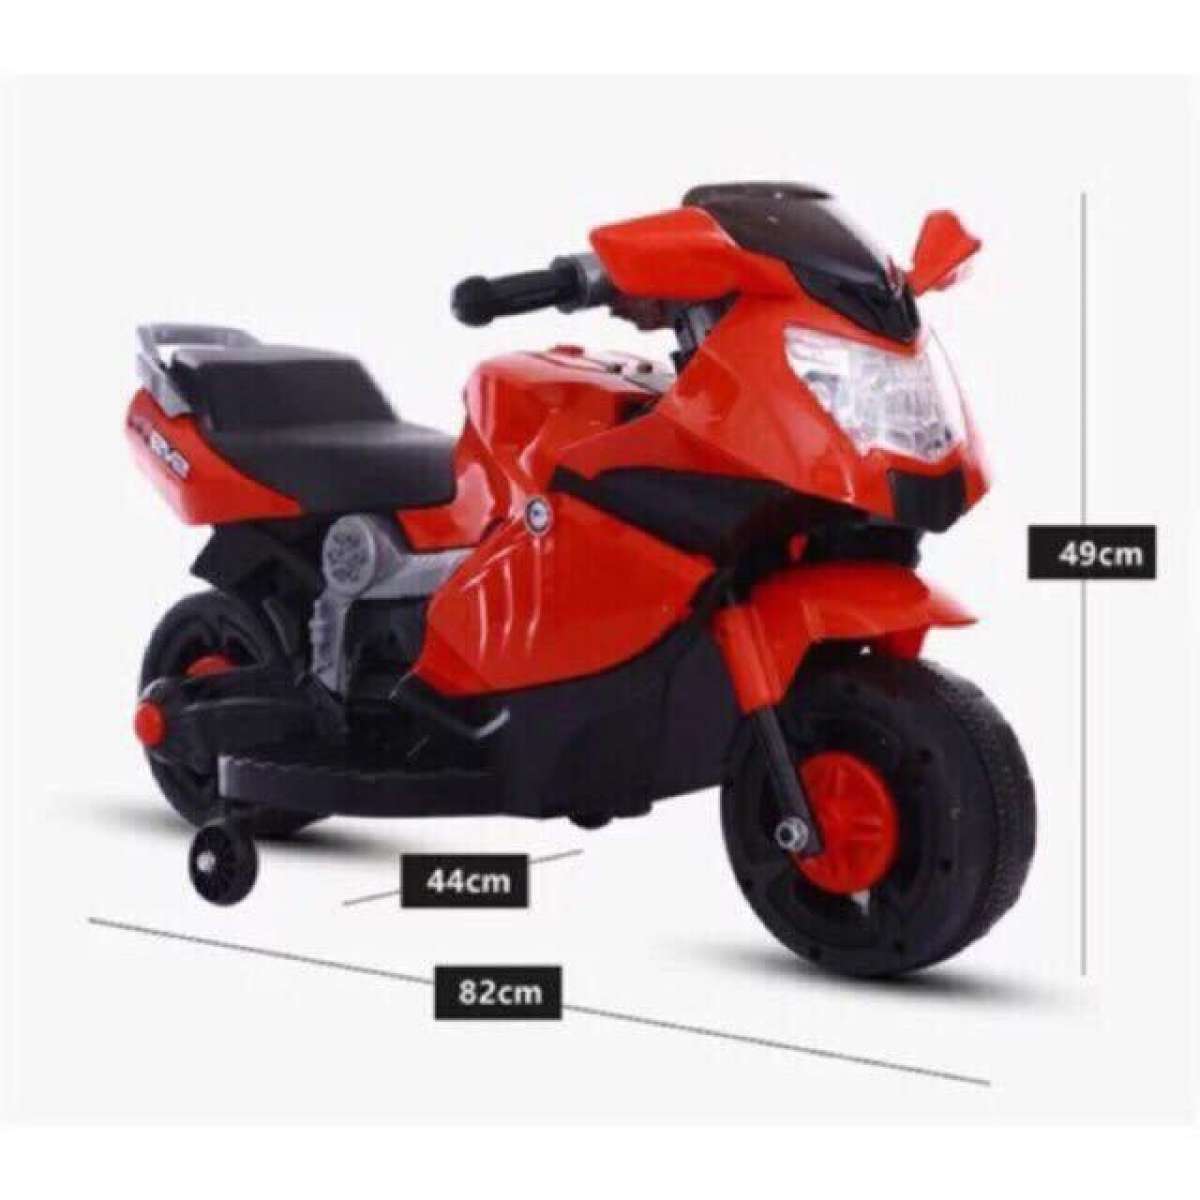 rechargeable motorbike for kids